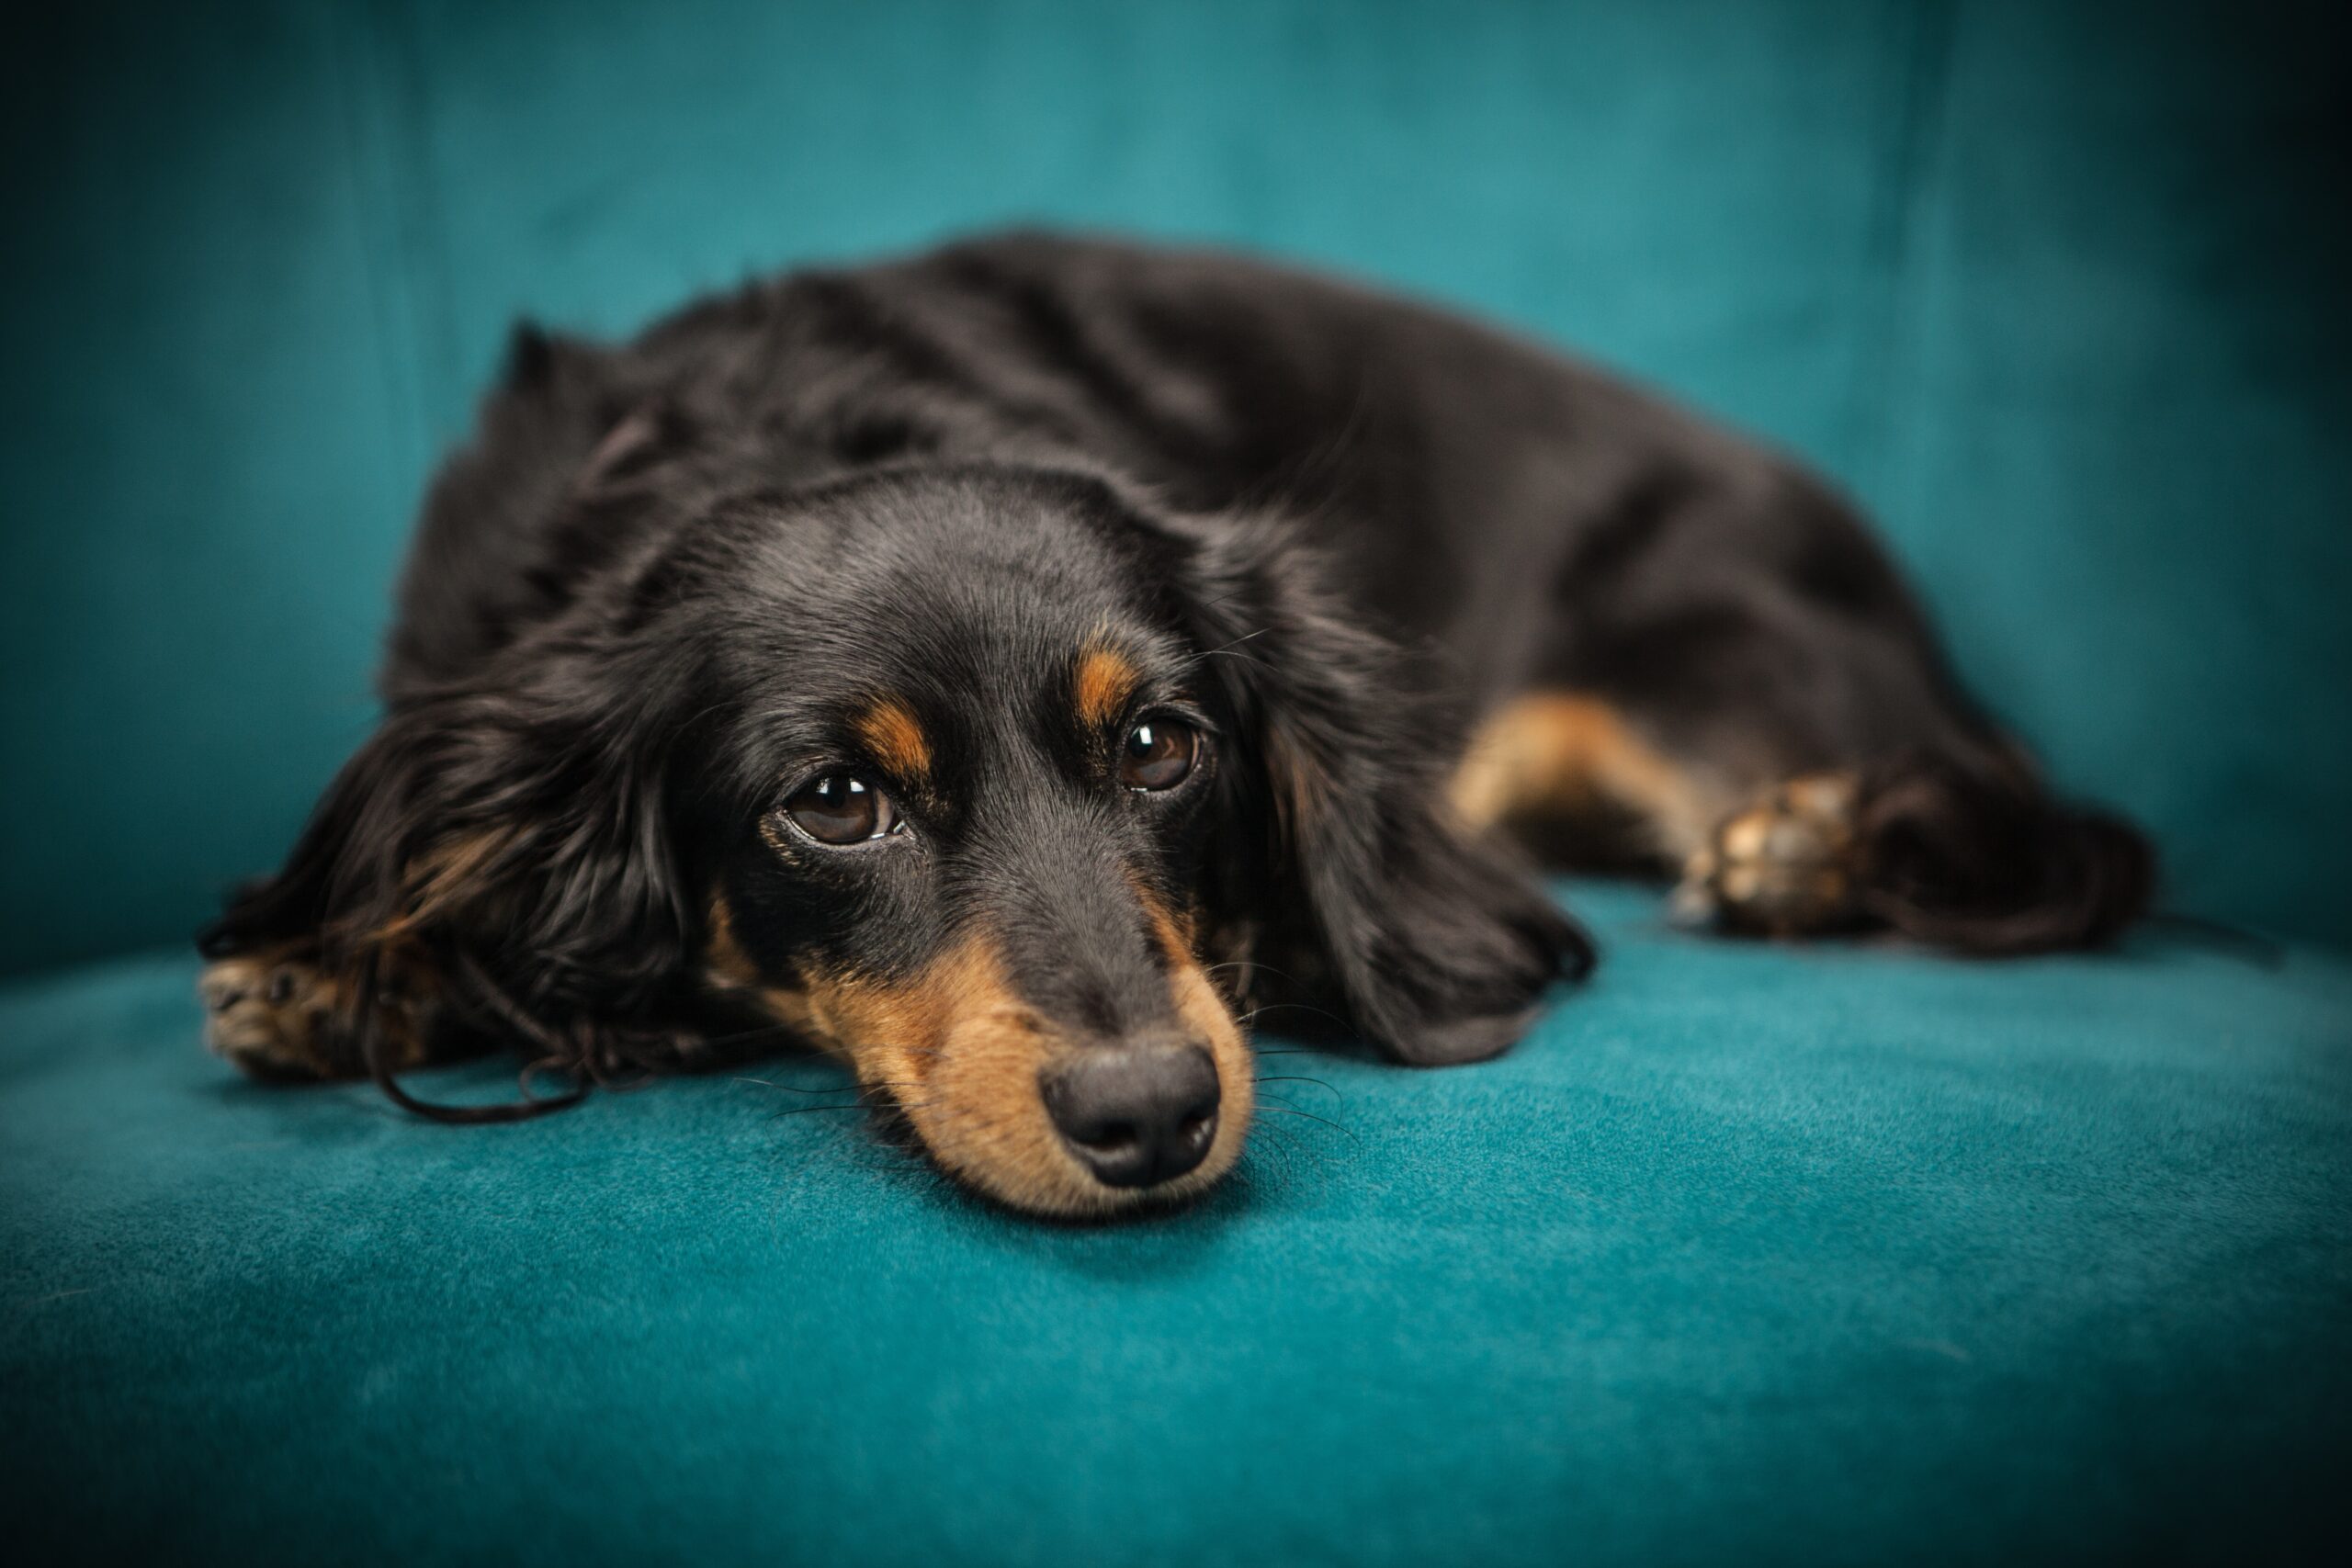 5 popular dog breeds you should never bring home, according to a vet. Photo: Pexels